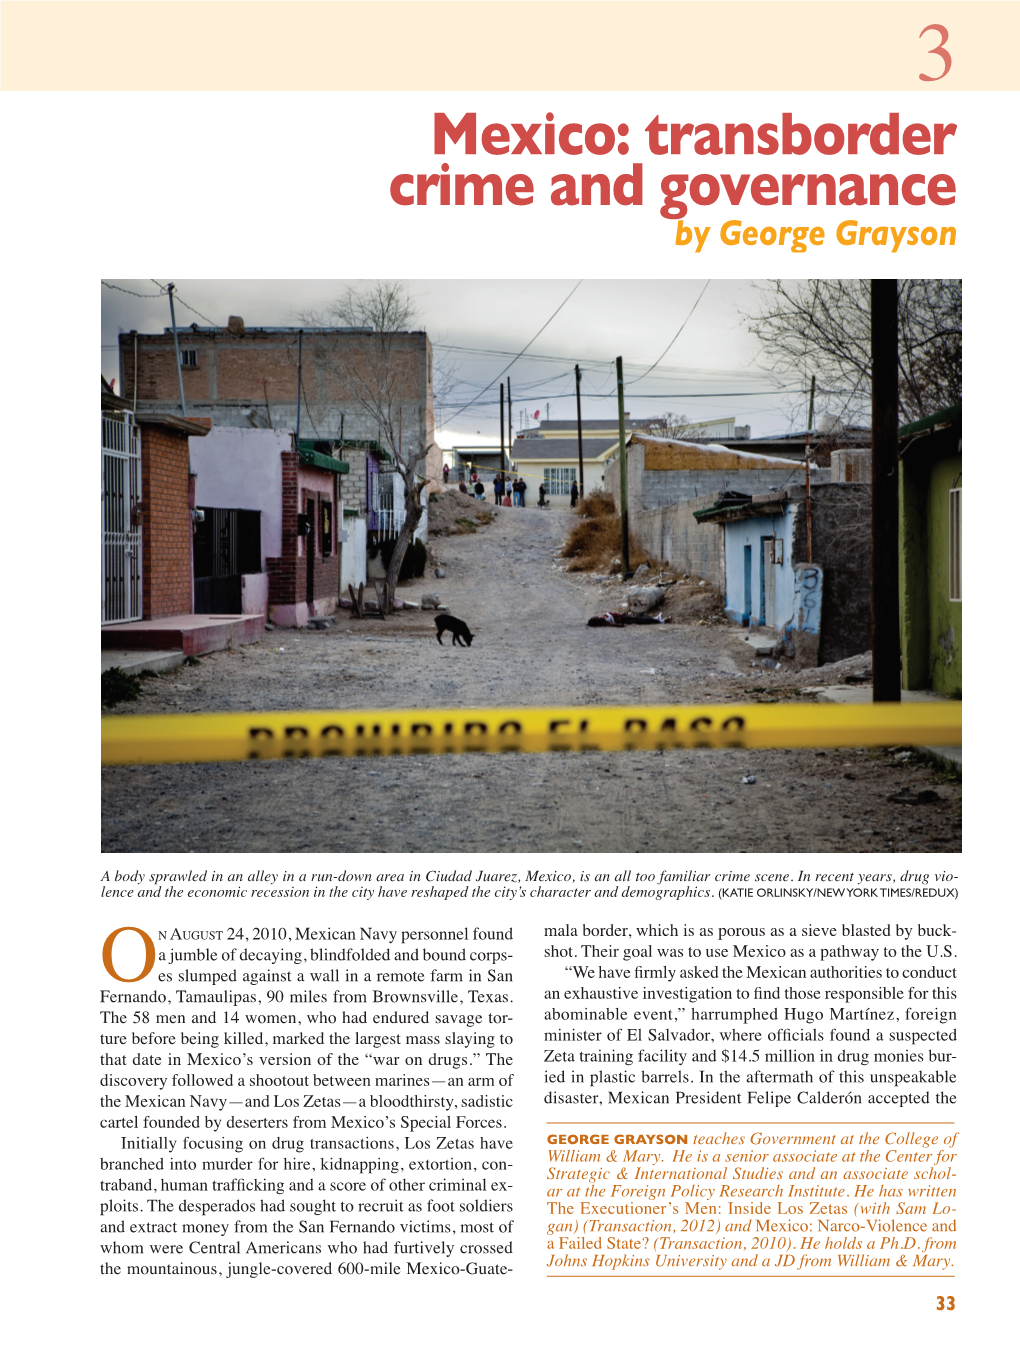 Mexico: Transborder Crime and Governance by George Grayson